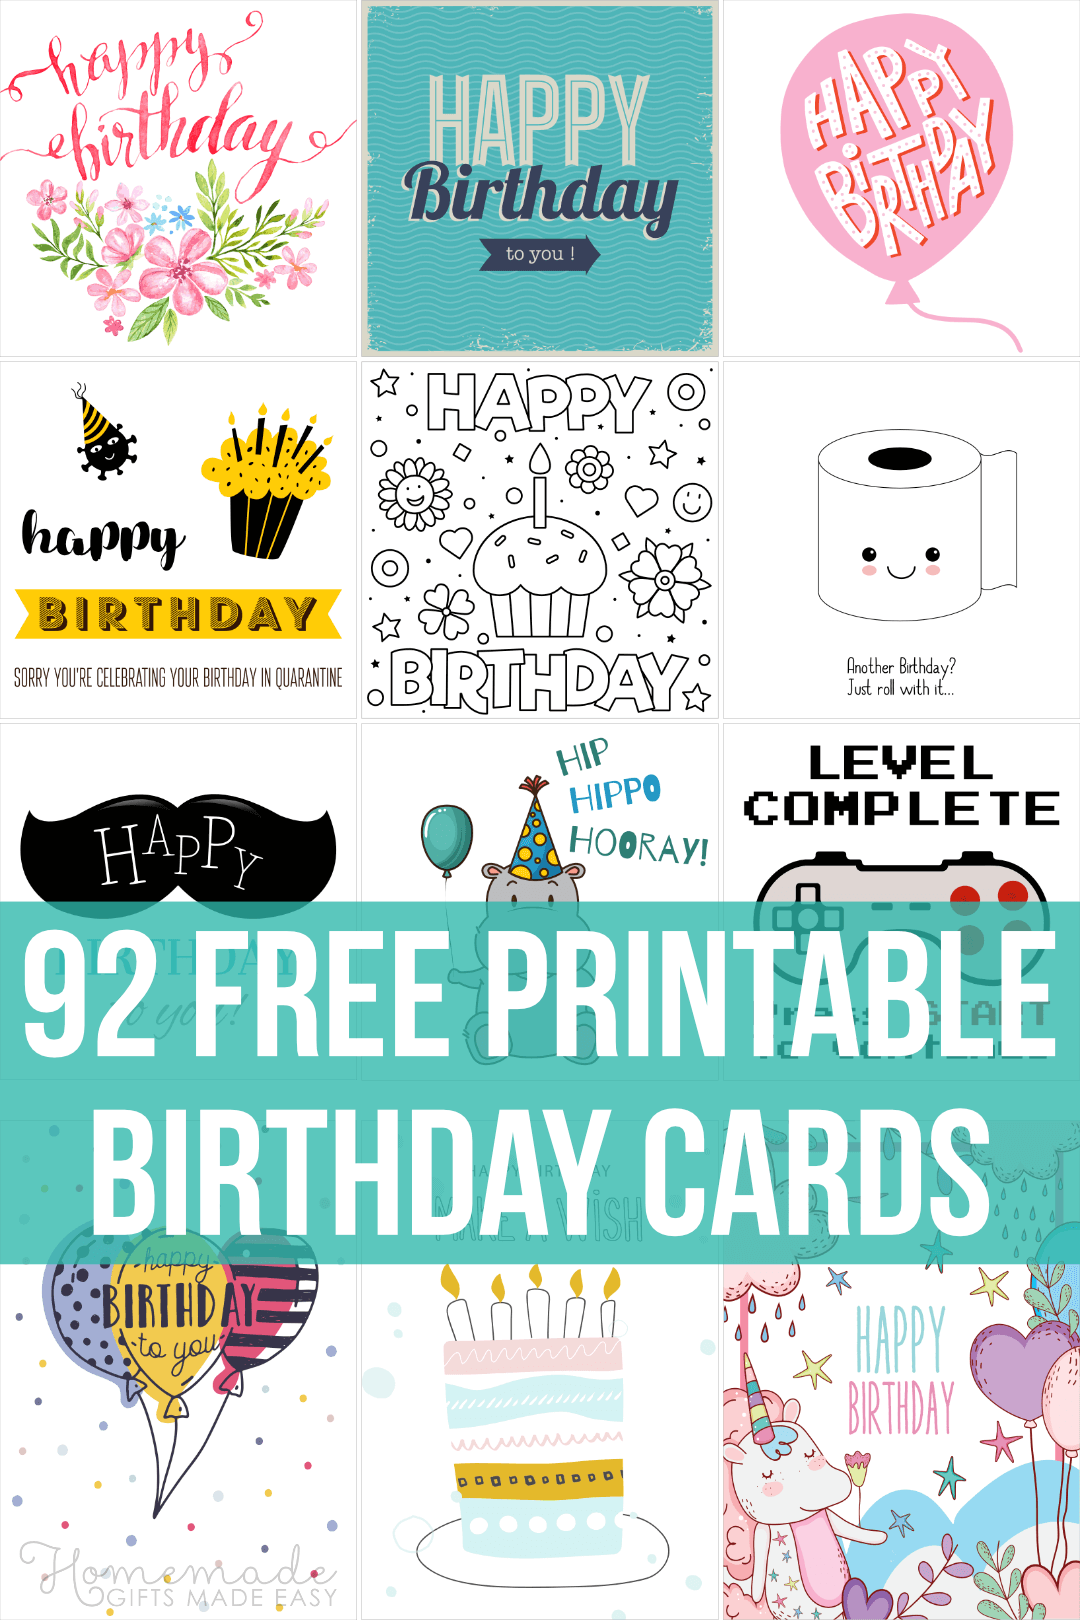 92-free-printable-birthday-cards-for-him-her-kids-and-adults-print